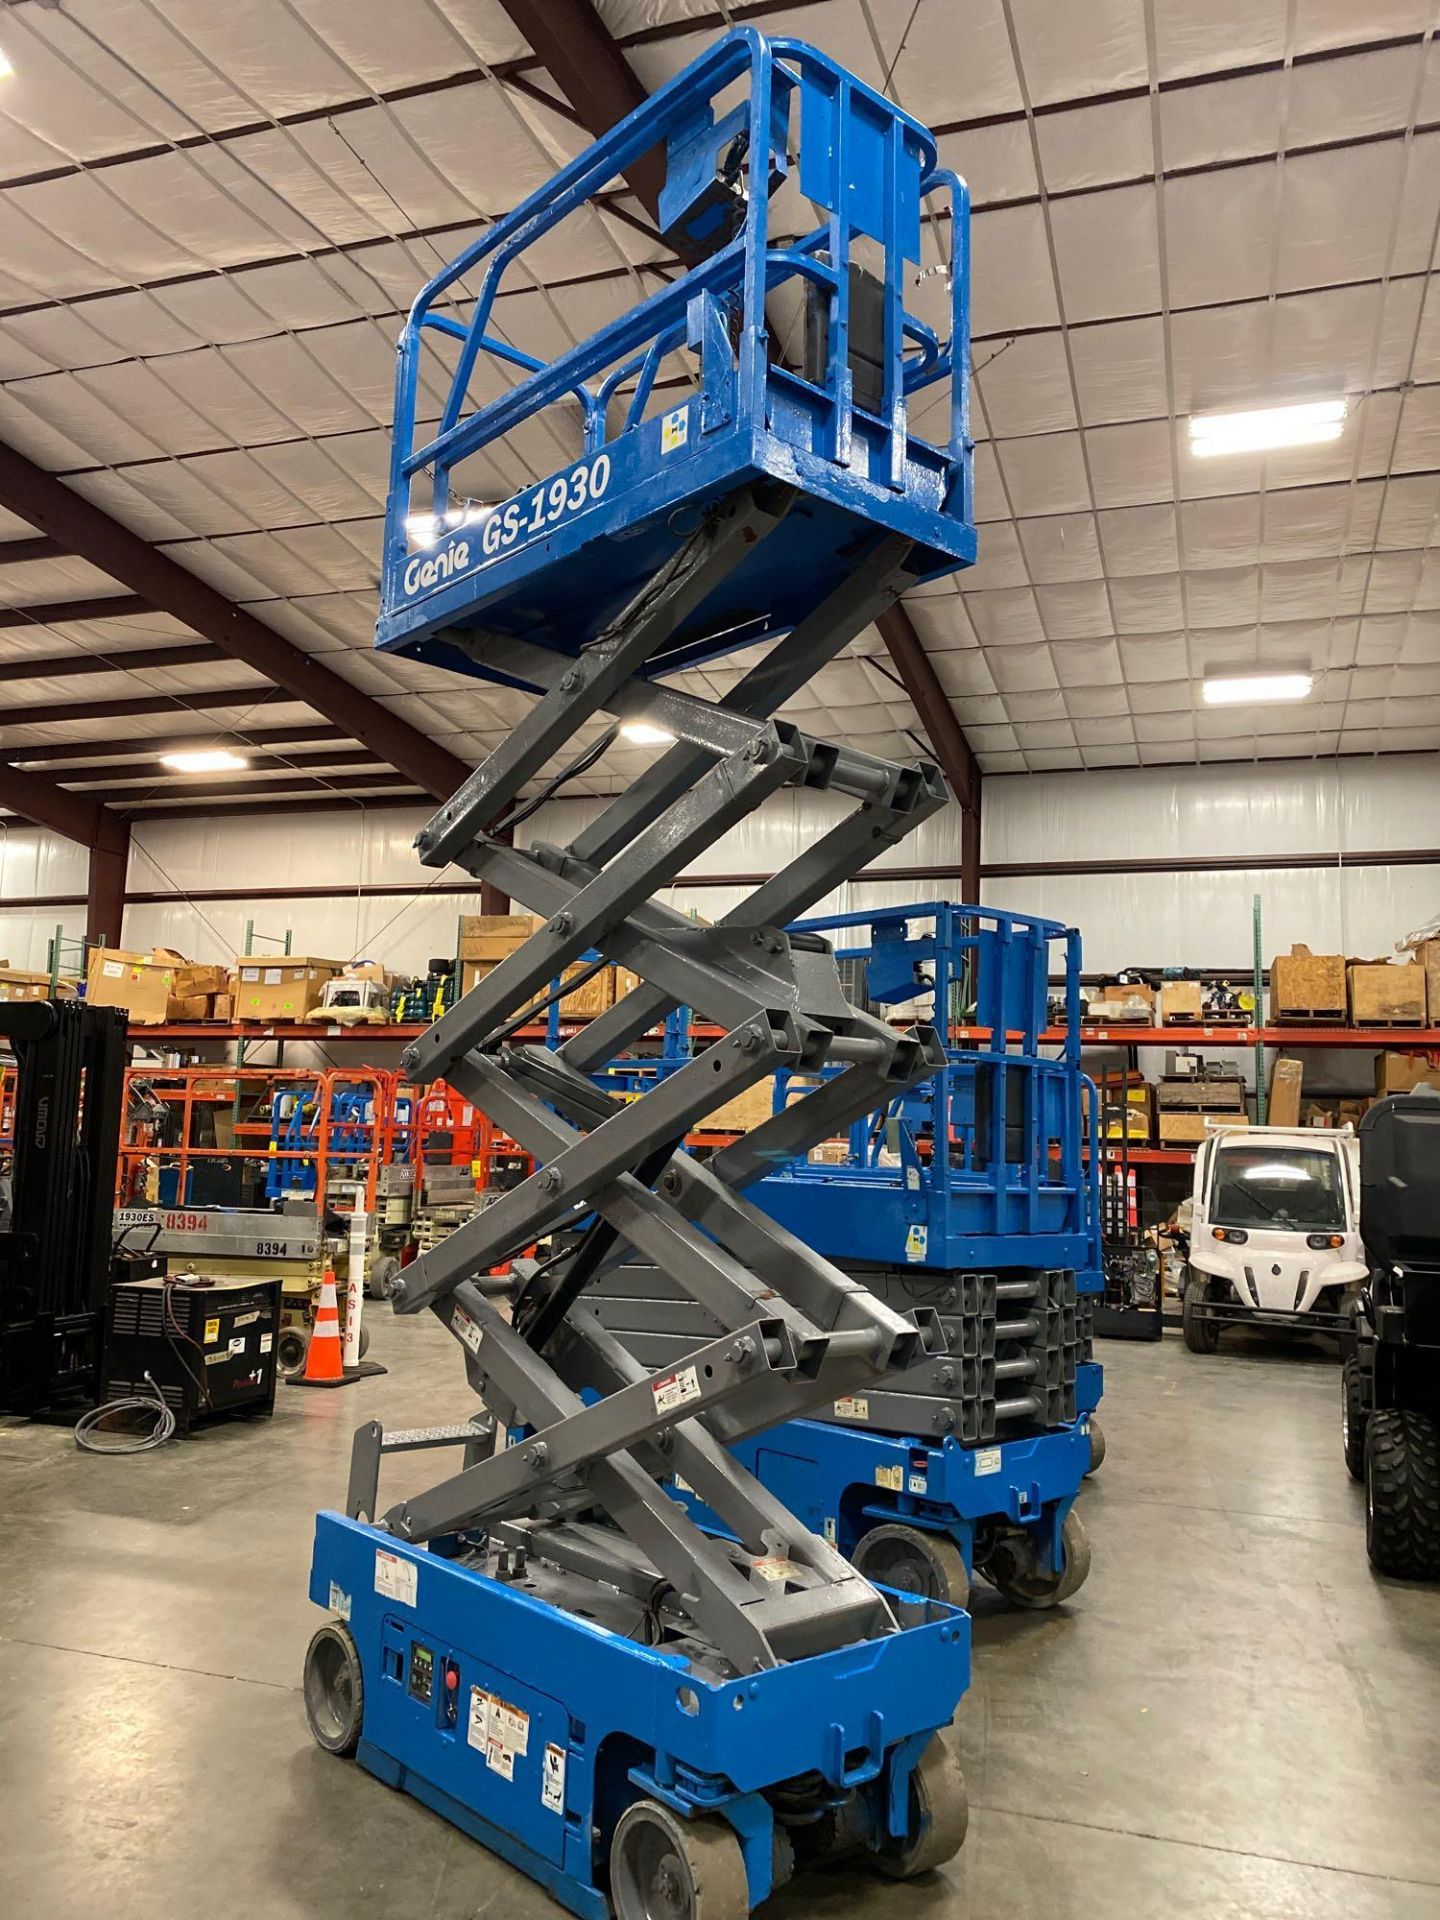 2013 GENIE GS1930 SCISSOR LIFT, SELF PROPELLED, 19' PLATFORM HEIGHT, BUILT IN BATTERY CHARGER, SLIDE - Image 5 of 7